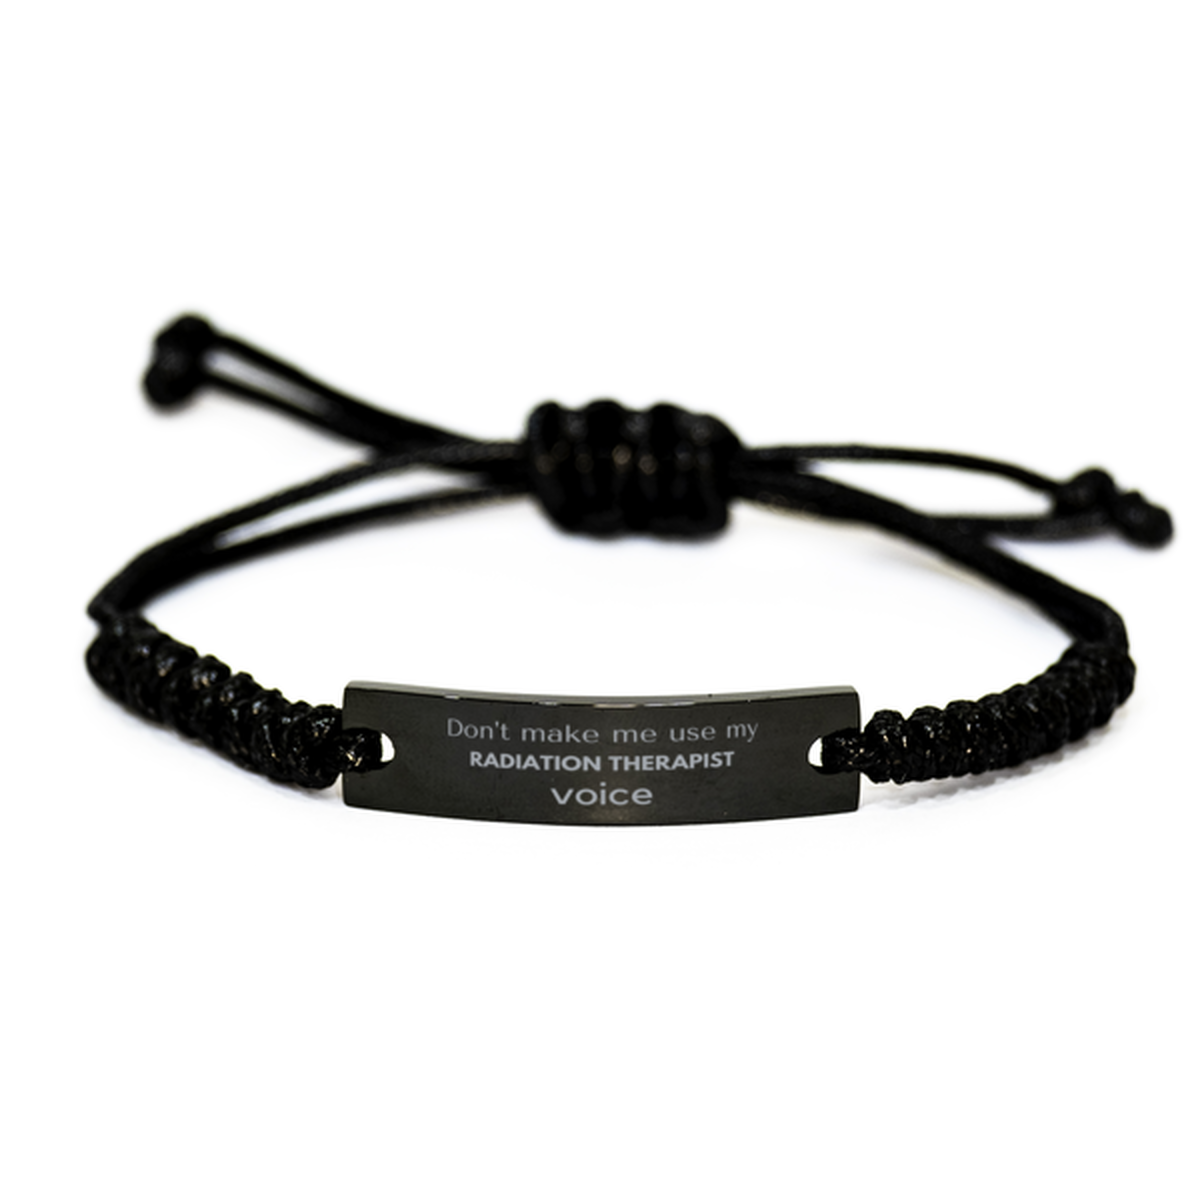 Don't make me use my Radiation Therapist voice, Sarcasm Radiation Therapist Gifts, Christmas Radiation Therapist Black Rope Bracelet Birthday Unique Gifts For Radiation Therapist Coworkers, Men, Women, Colleague, Friends